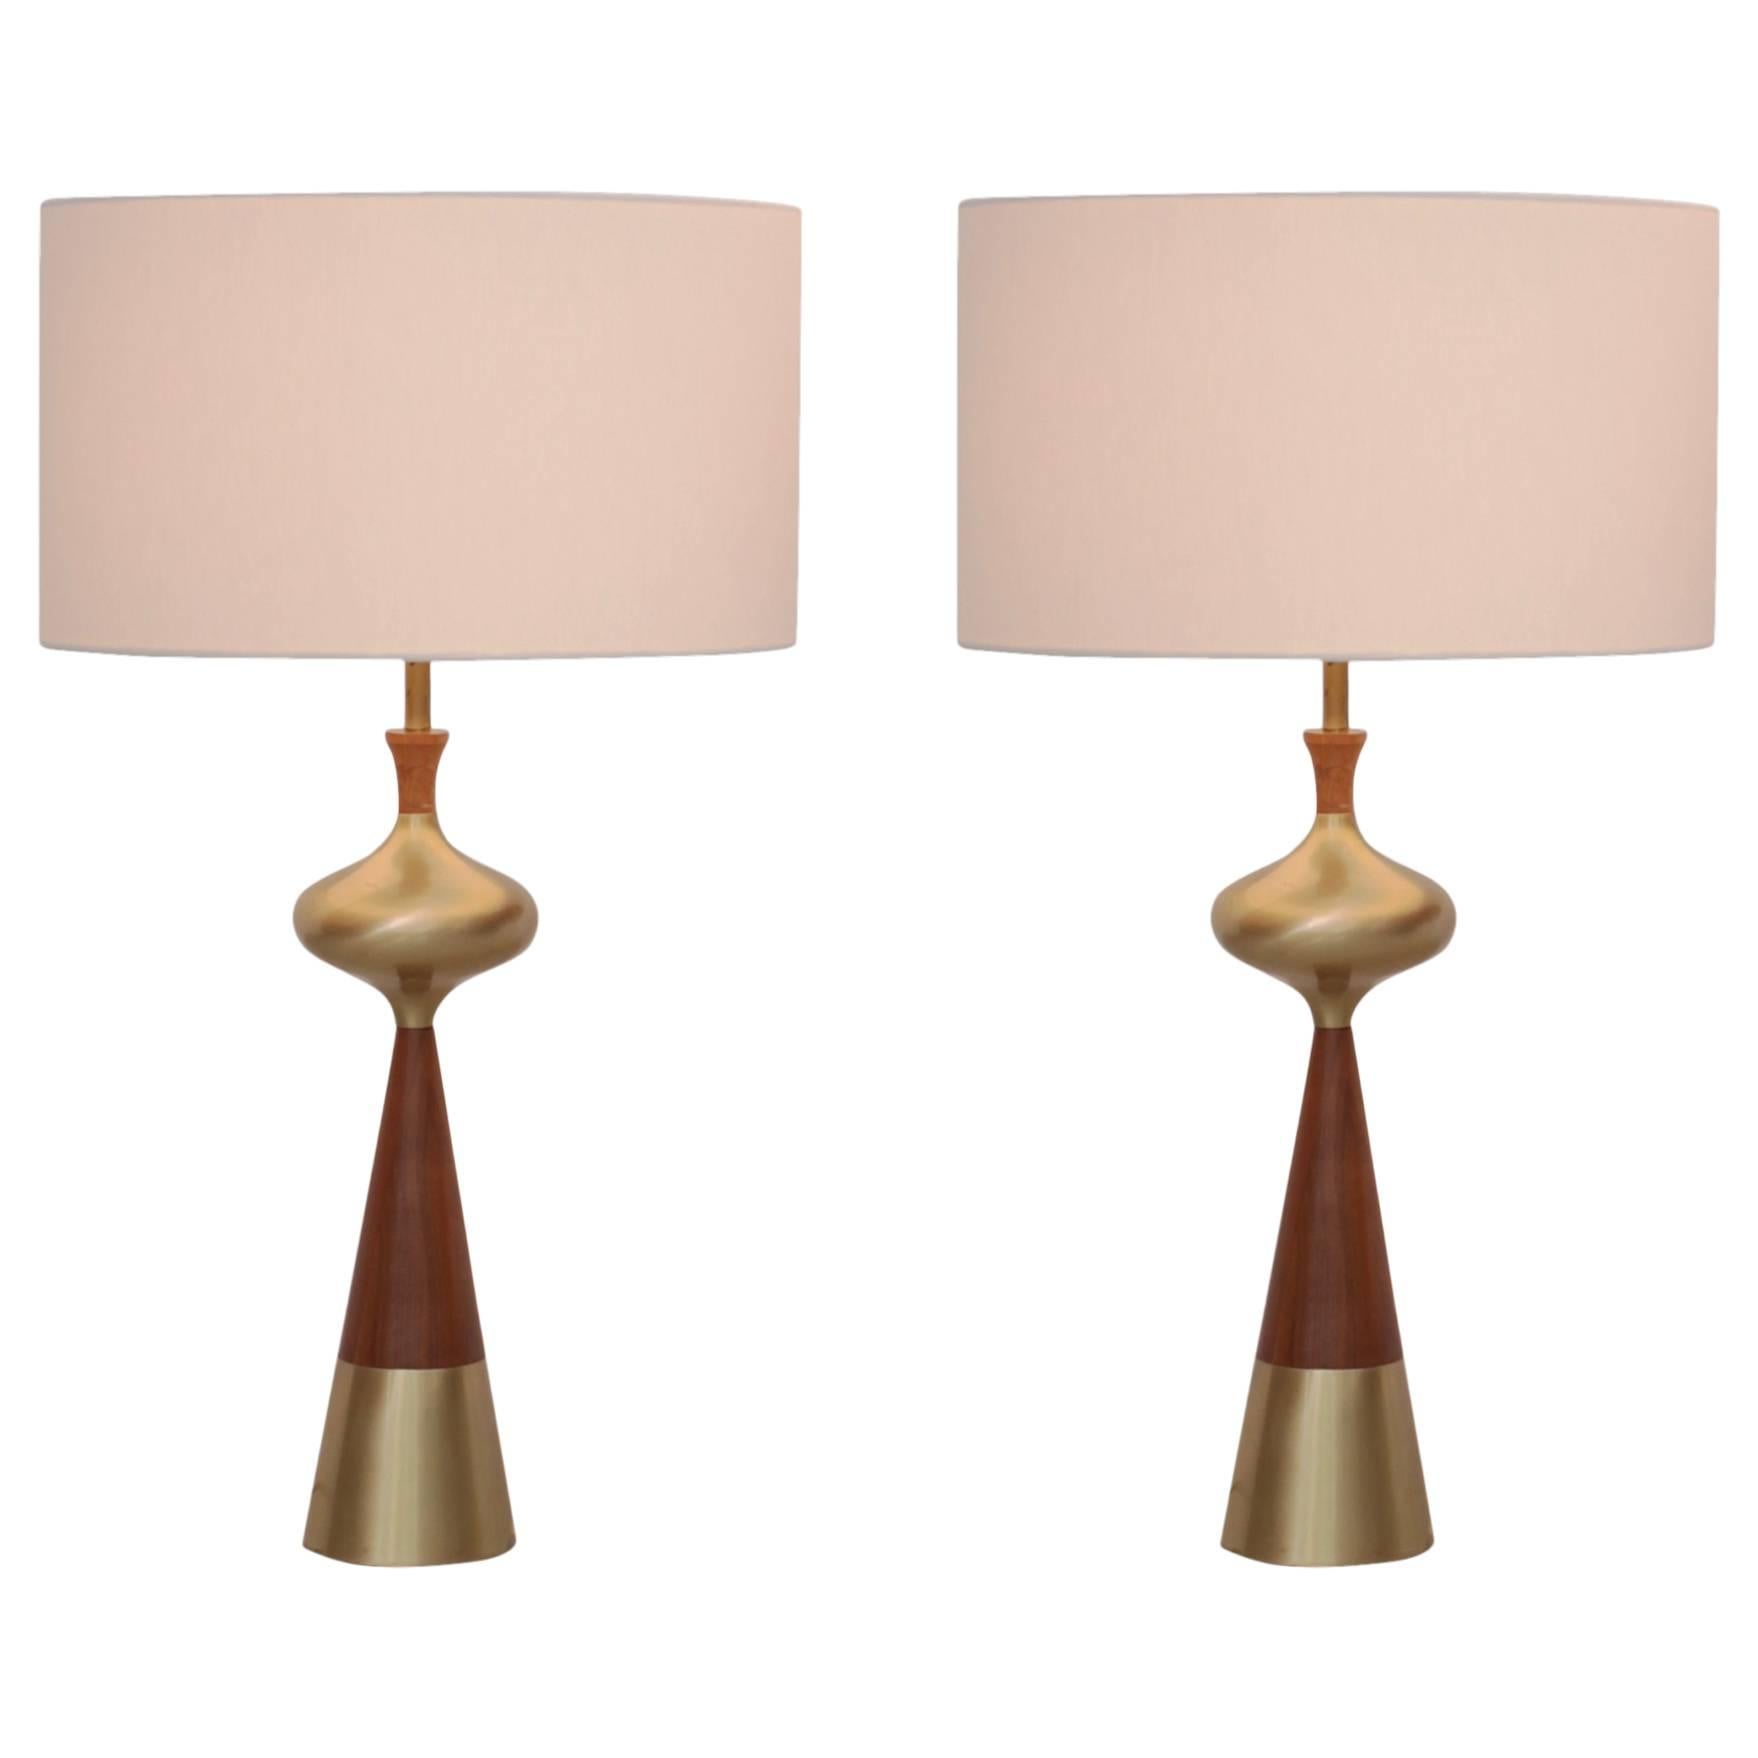 Set of Two Table Lamps in Walnut and Brass by Tony Paul for Westwood, 1950s